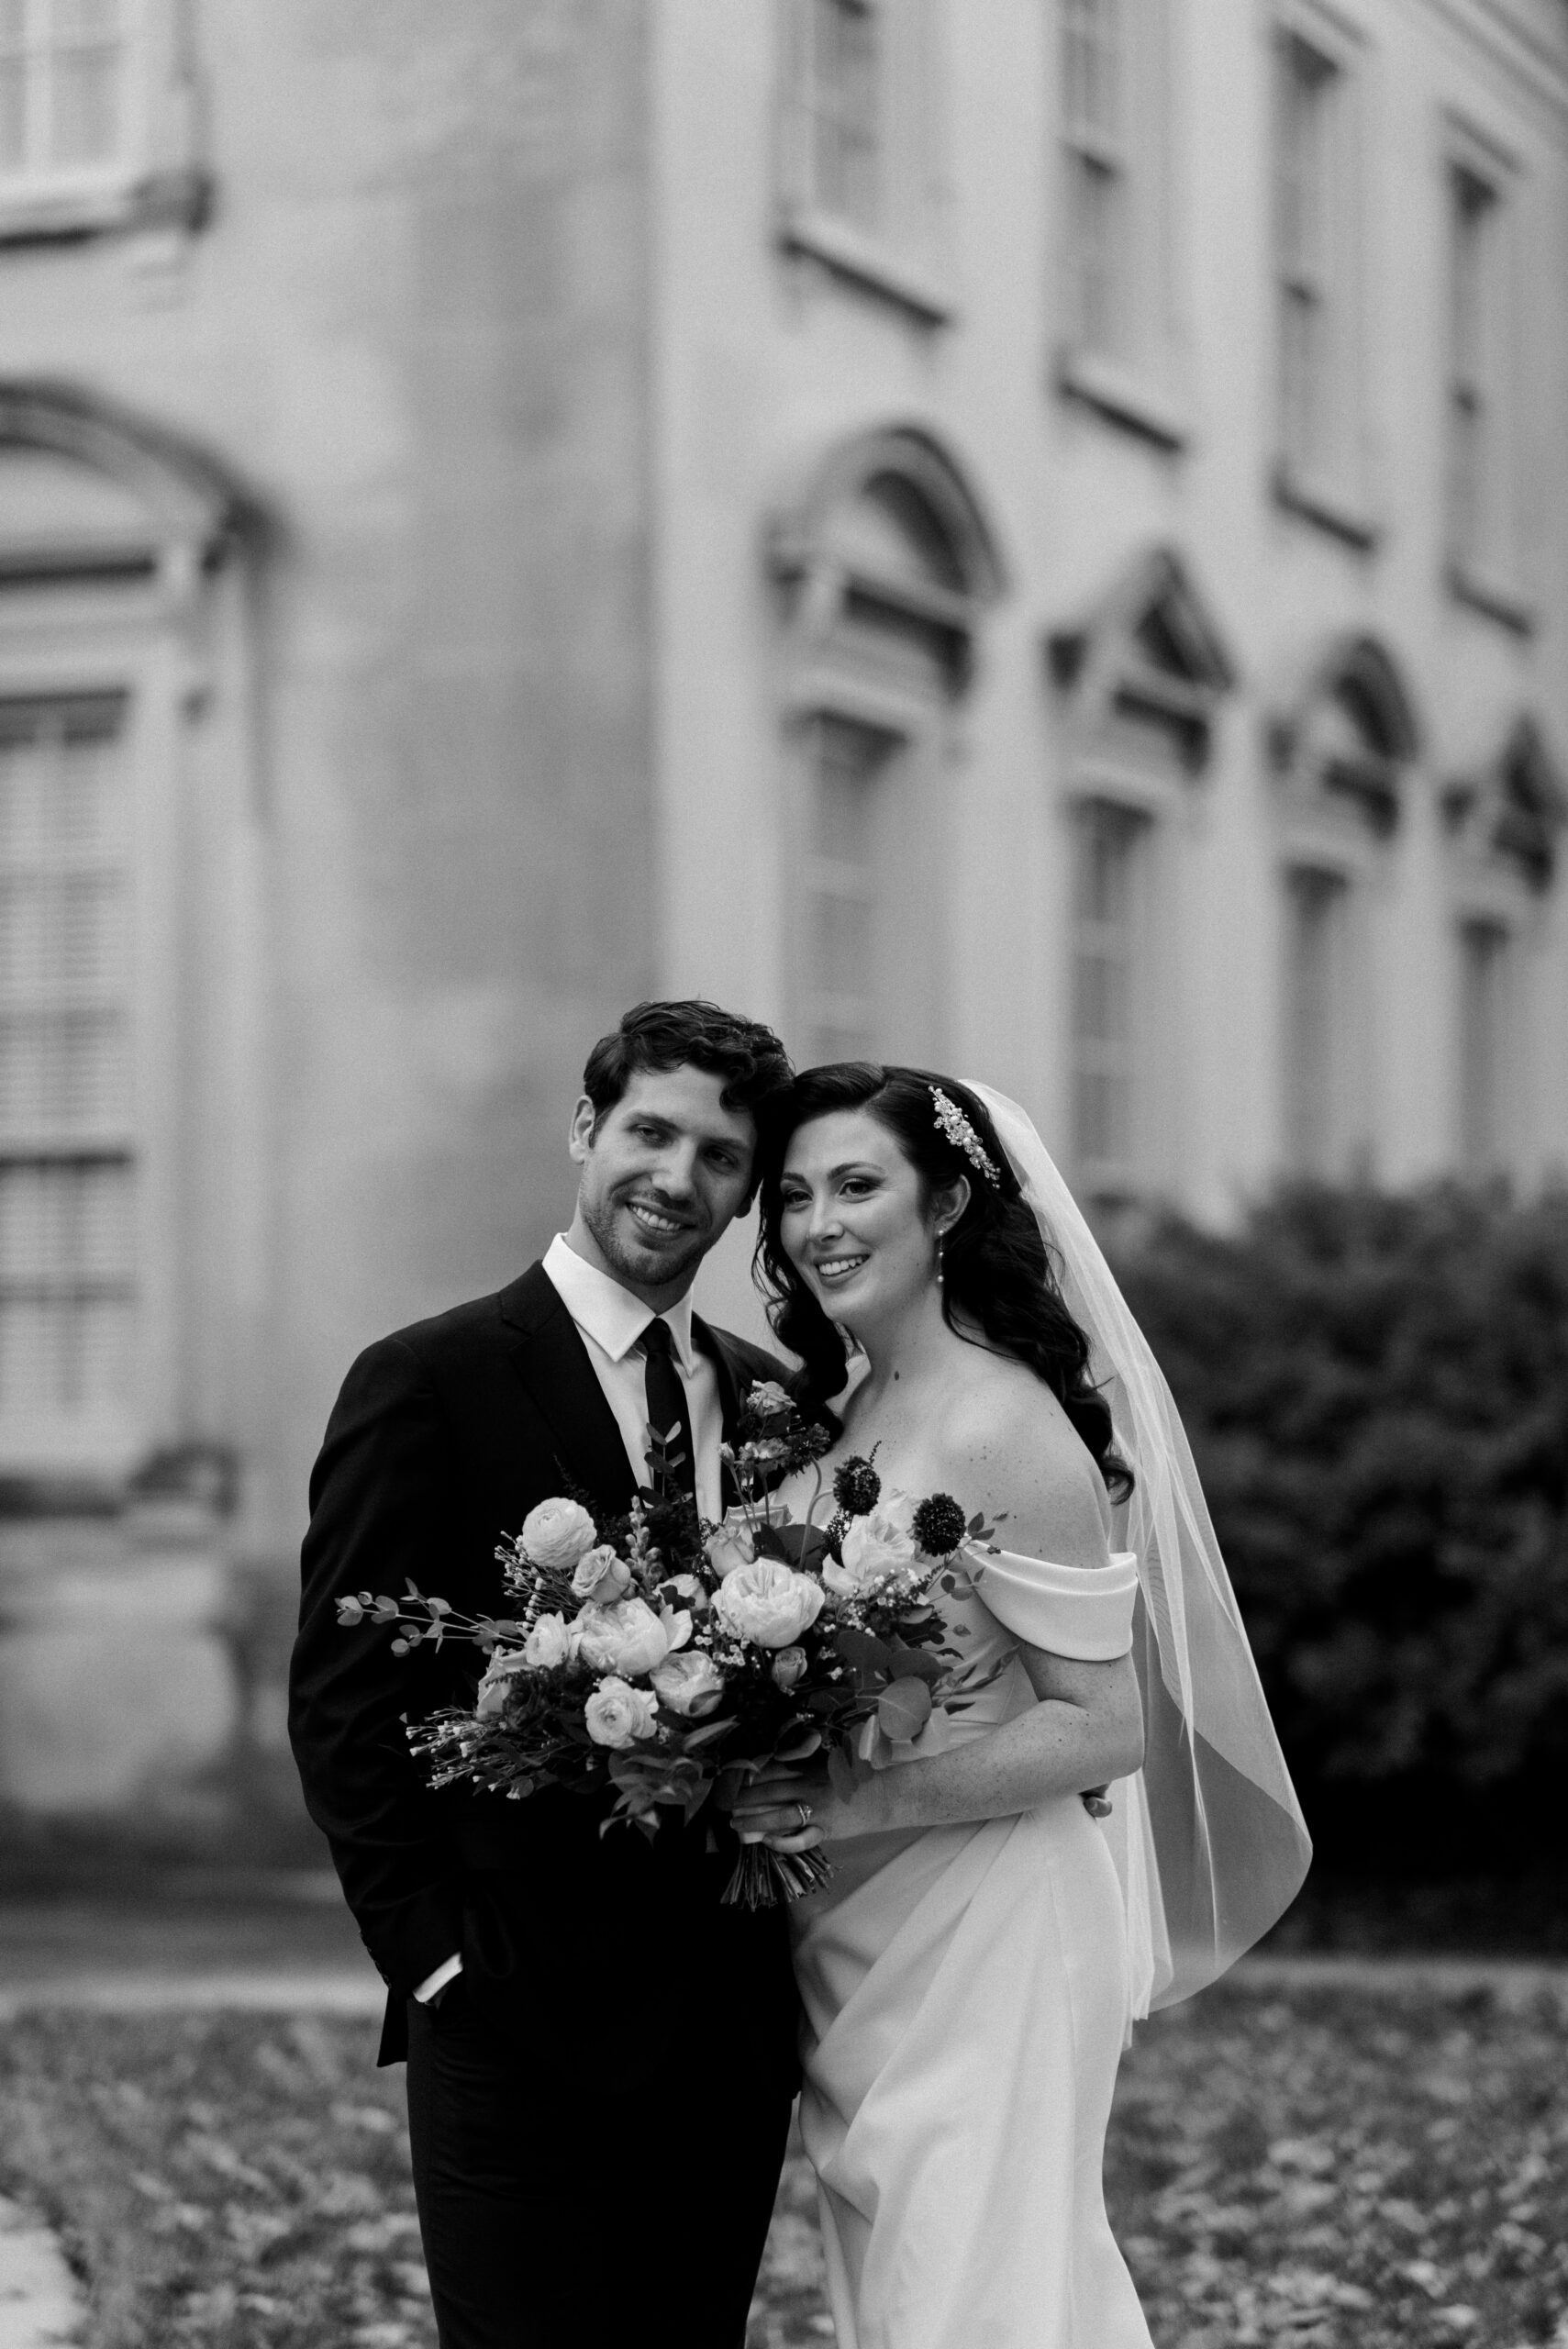 Black and white knees up image of bride and groom smiling with building in background